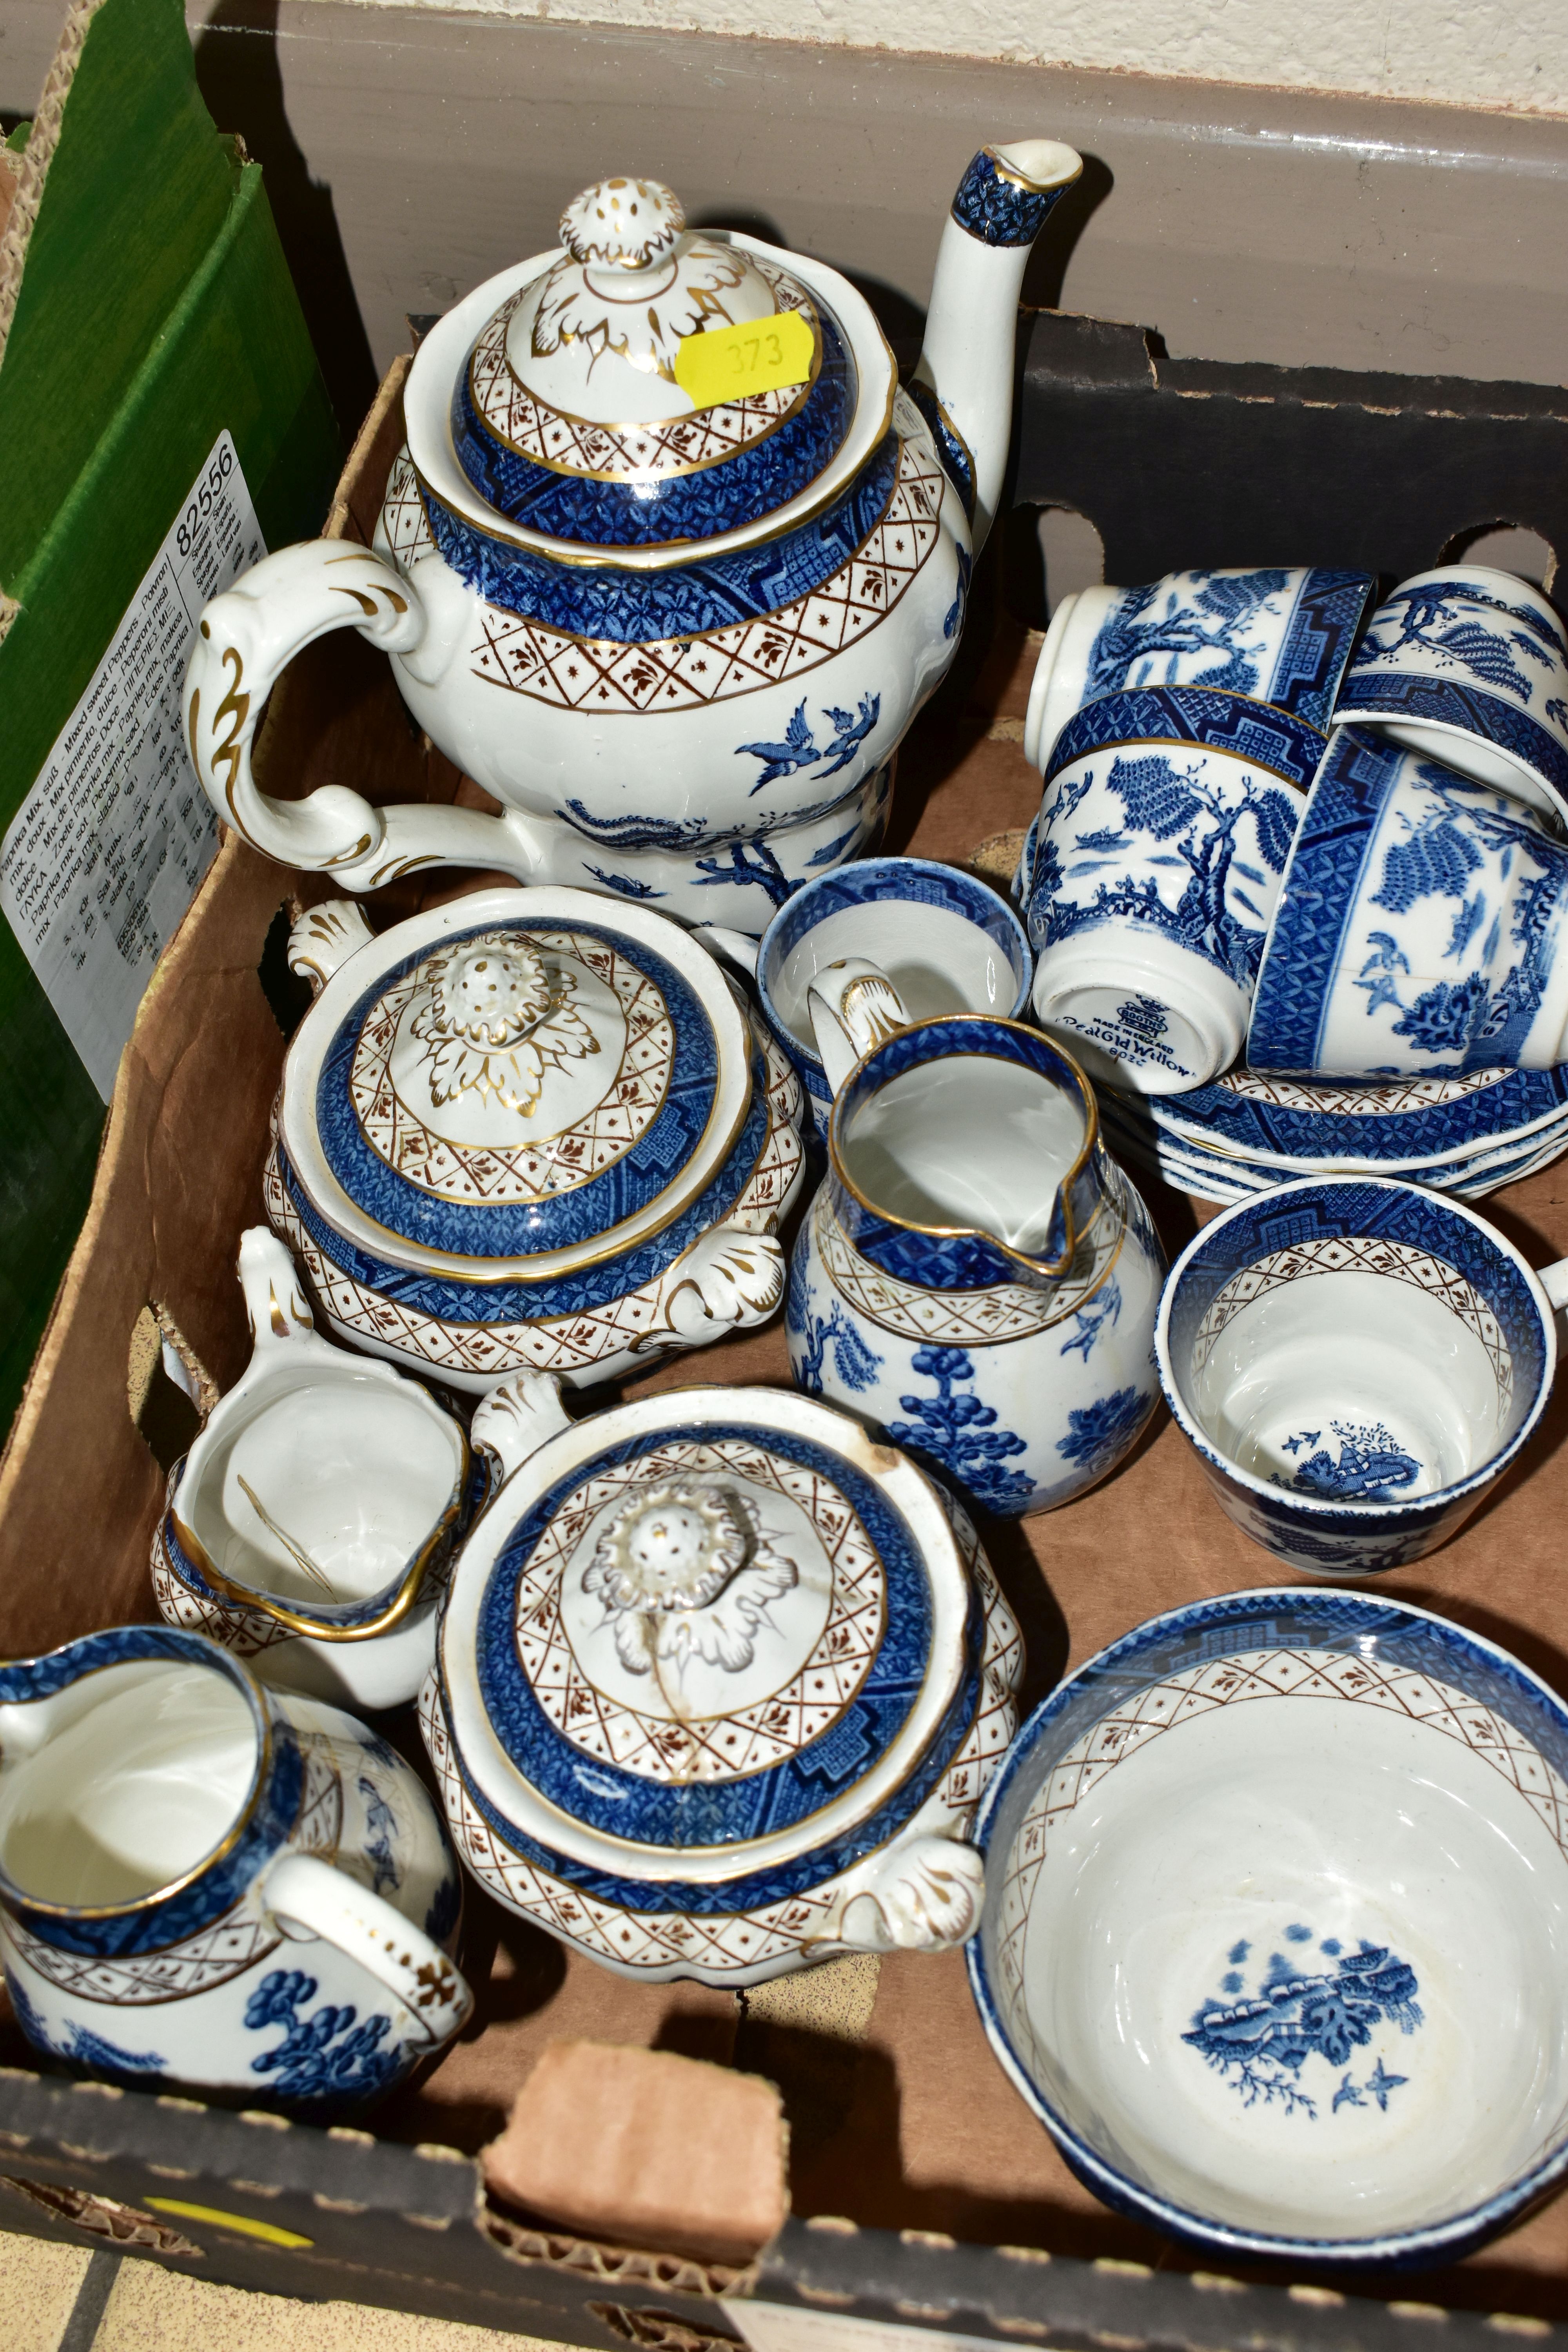 FOUR BOXES OF ROYAL DOULTON - BOOTHS 'REAL OLD WILLOW' PATTERN DINNERWARES AND TEAWARES A8025, - Image 5 of 7